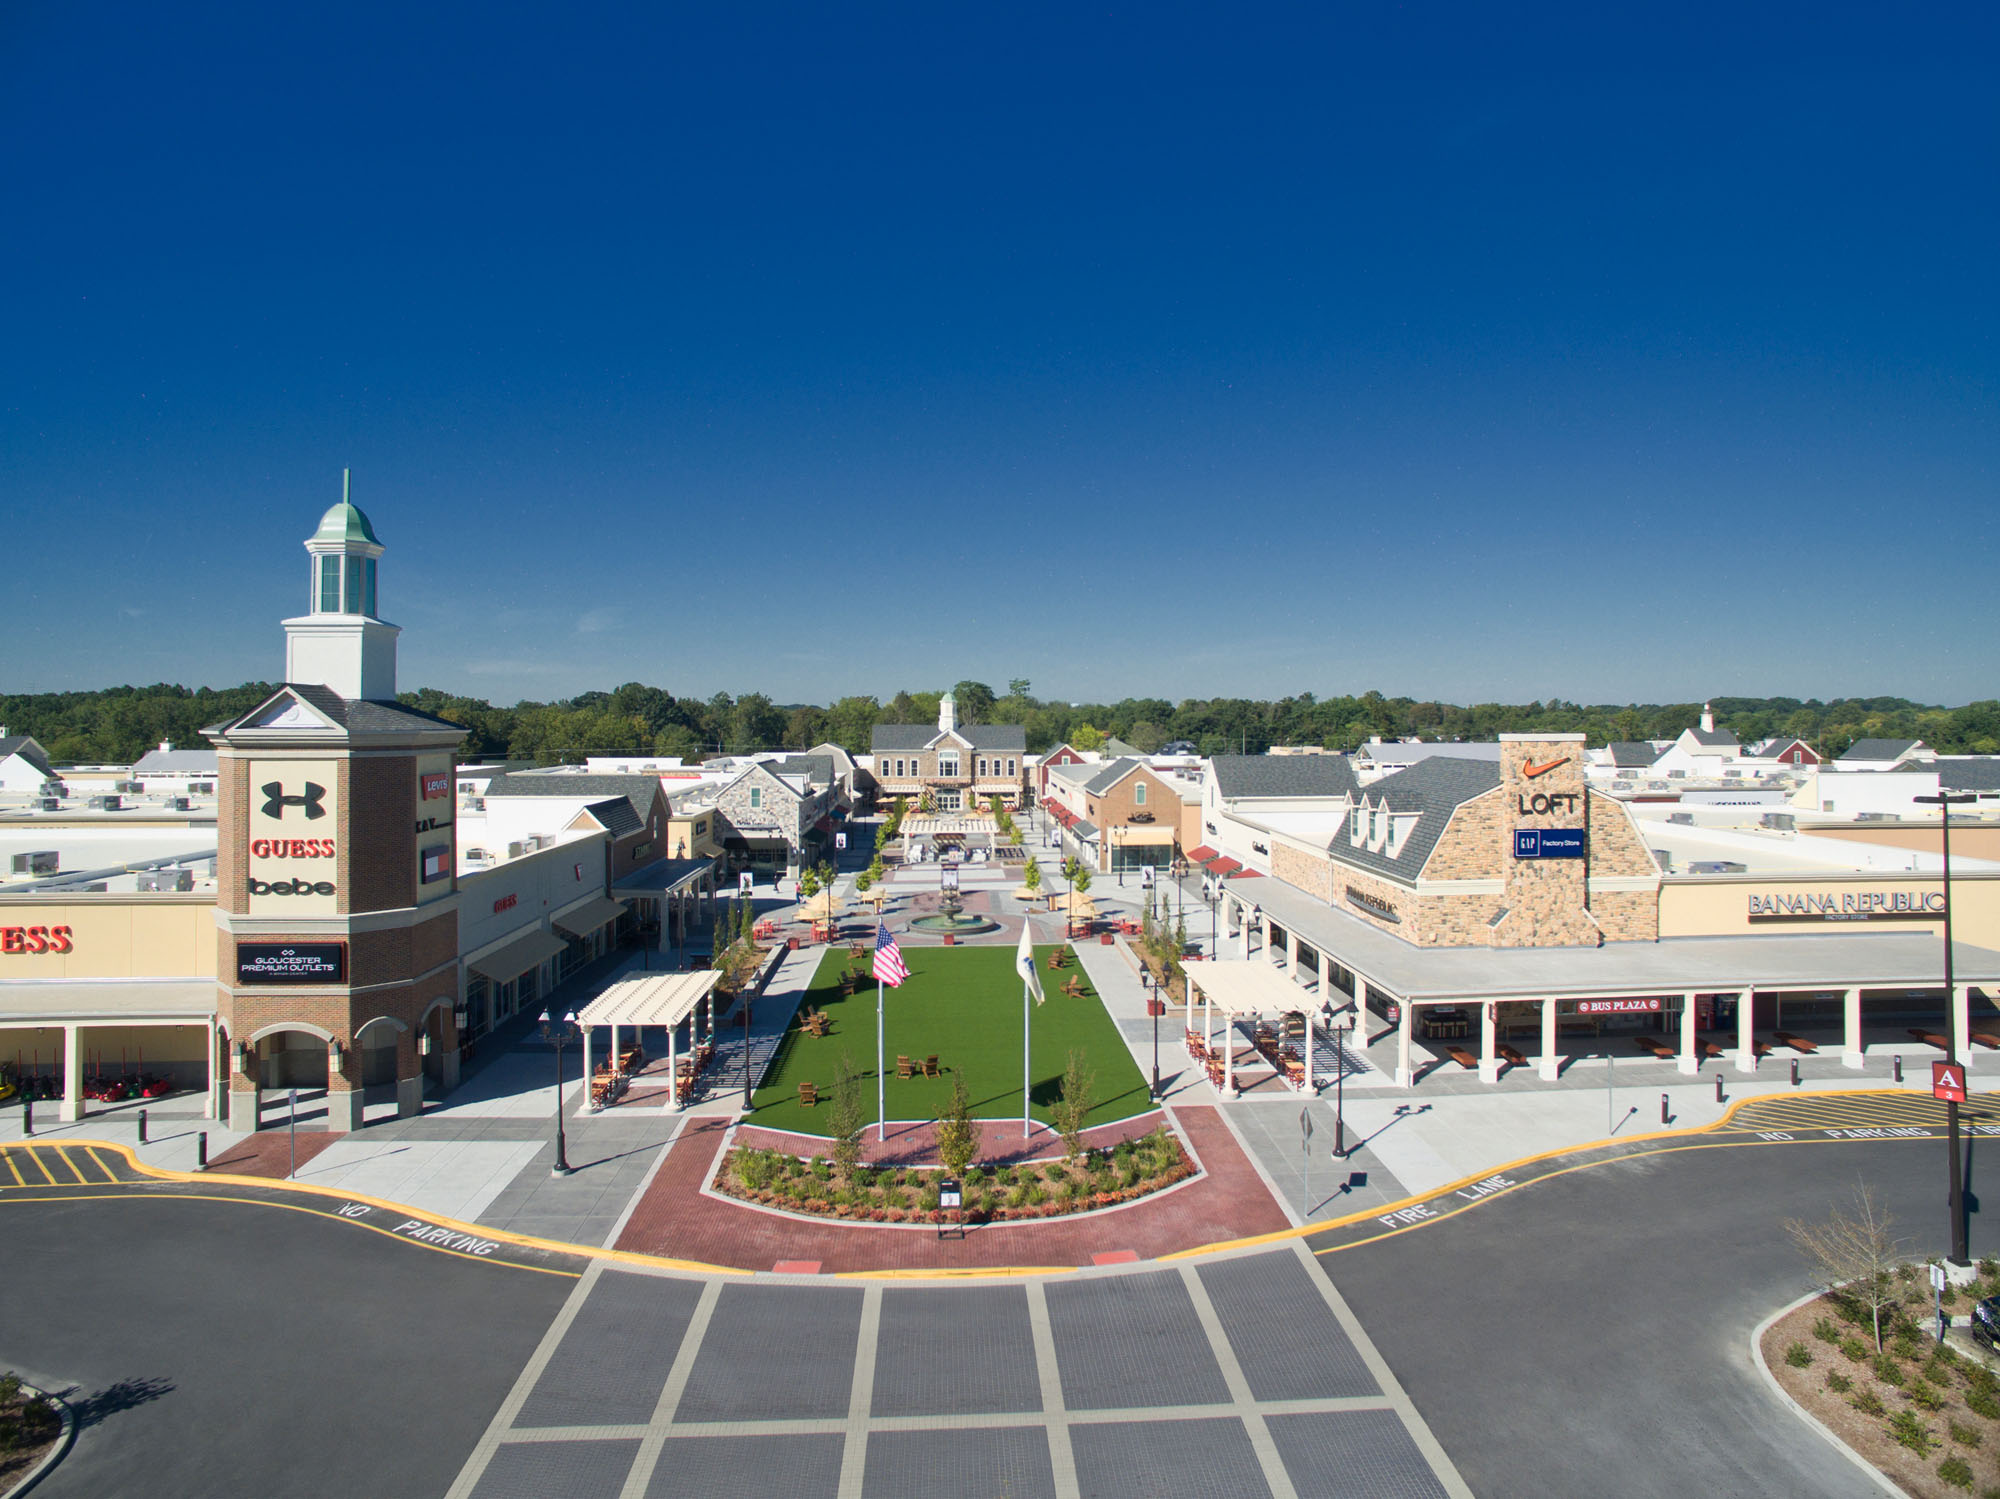 gloucester outlets new jersey